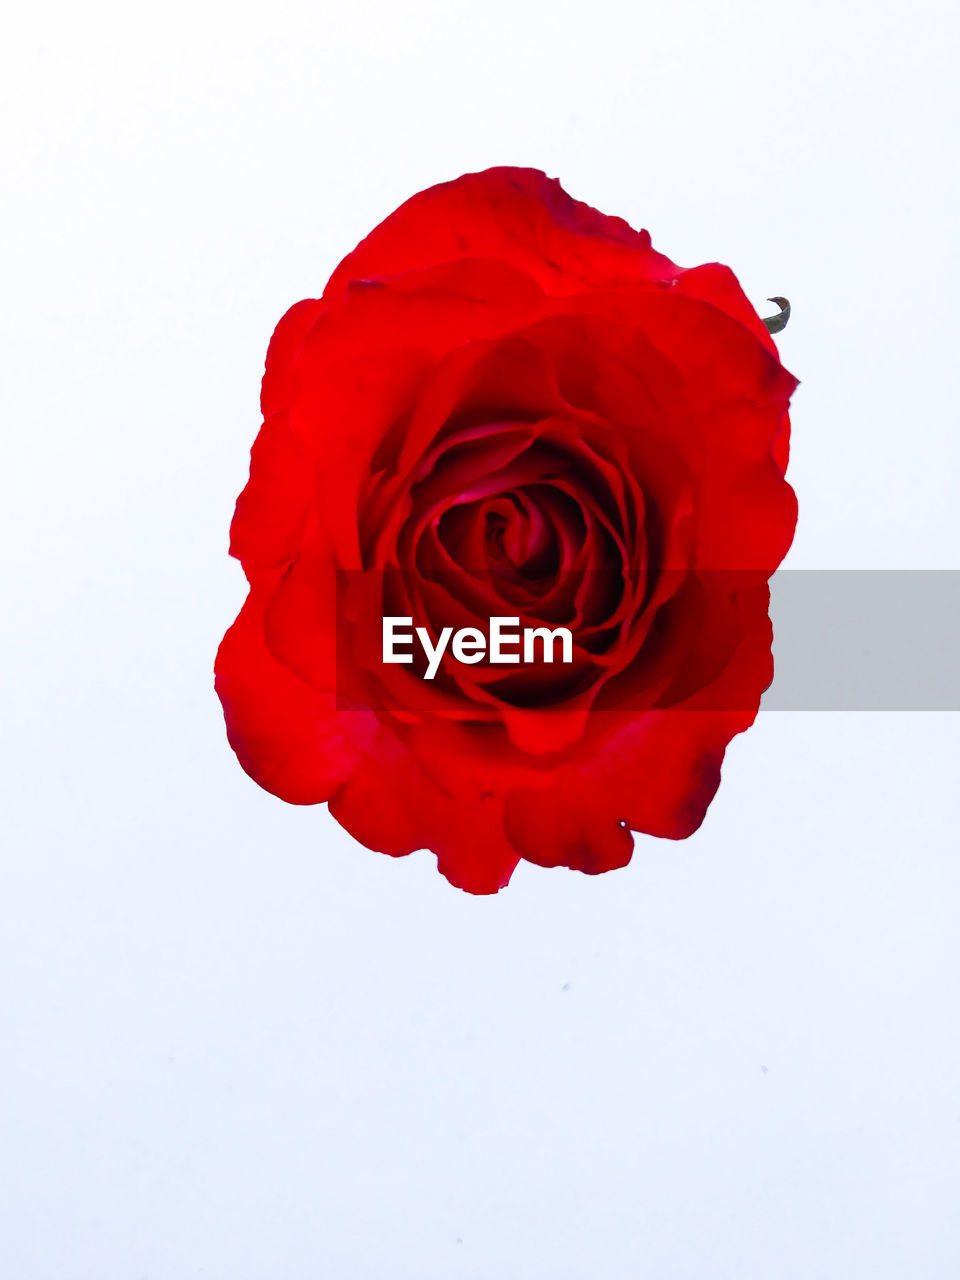 RED ROSE AGAINST WHITE BACKGROUND